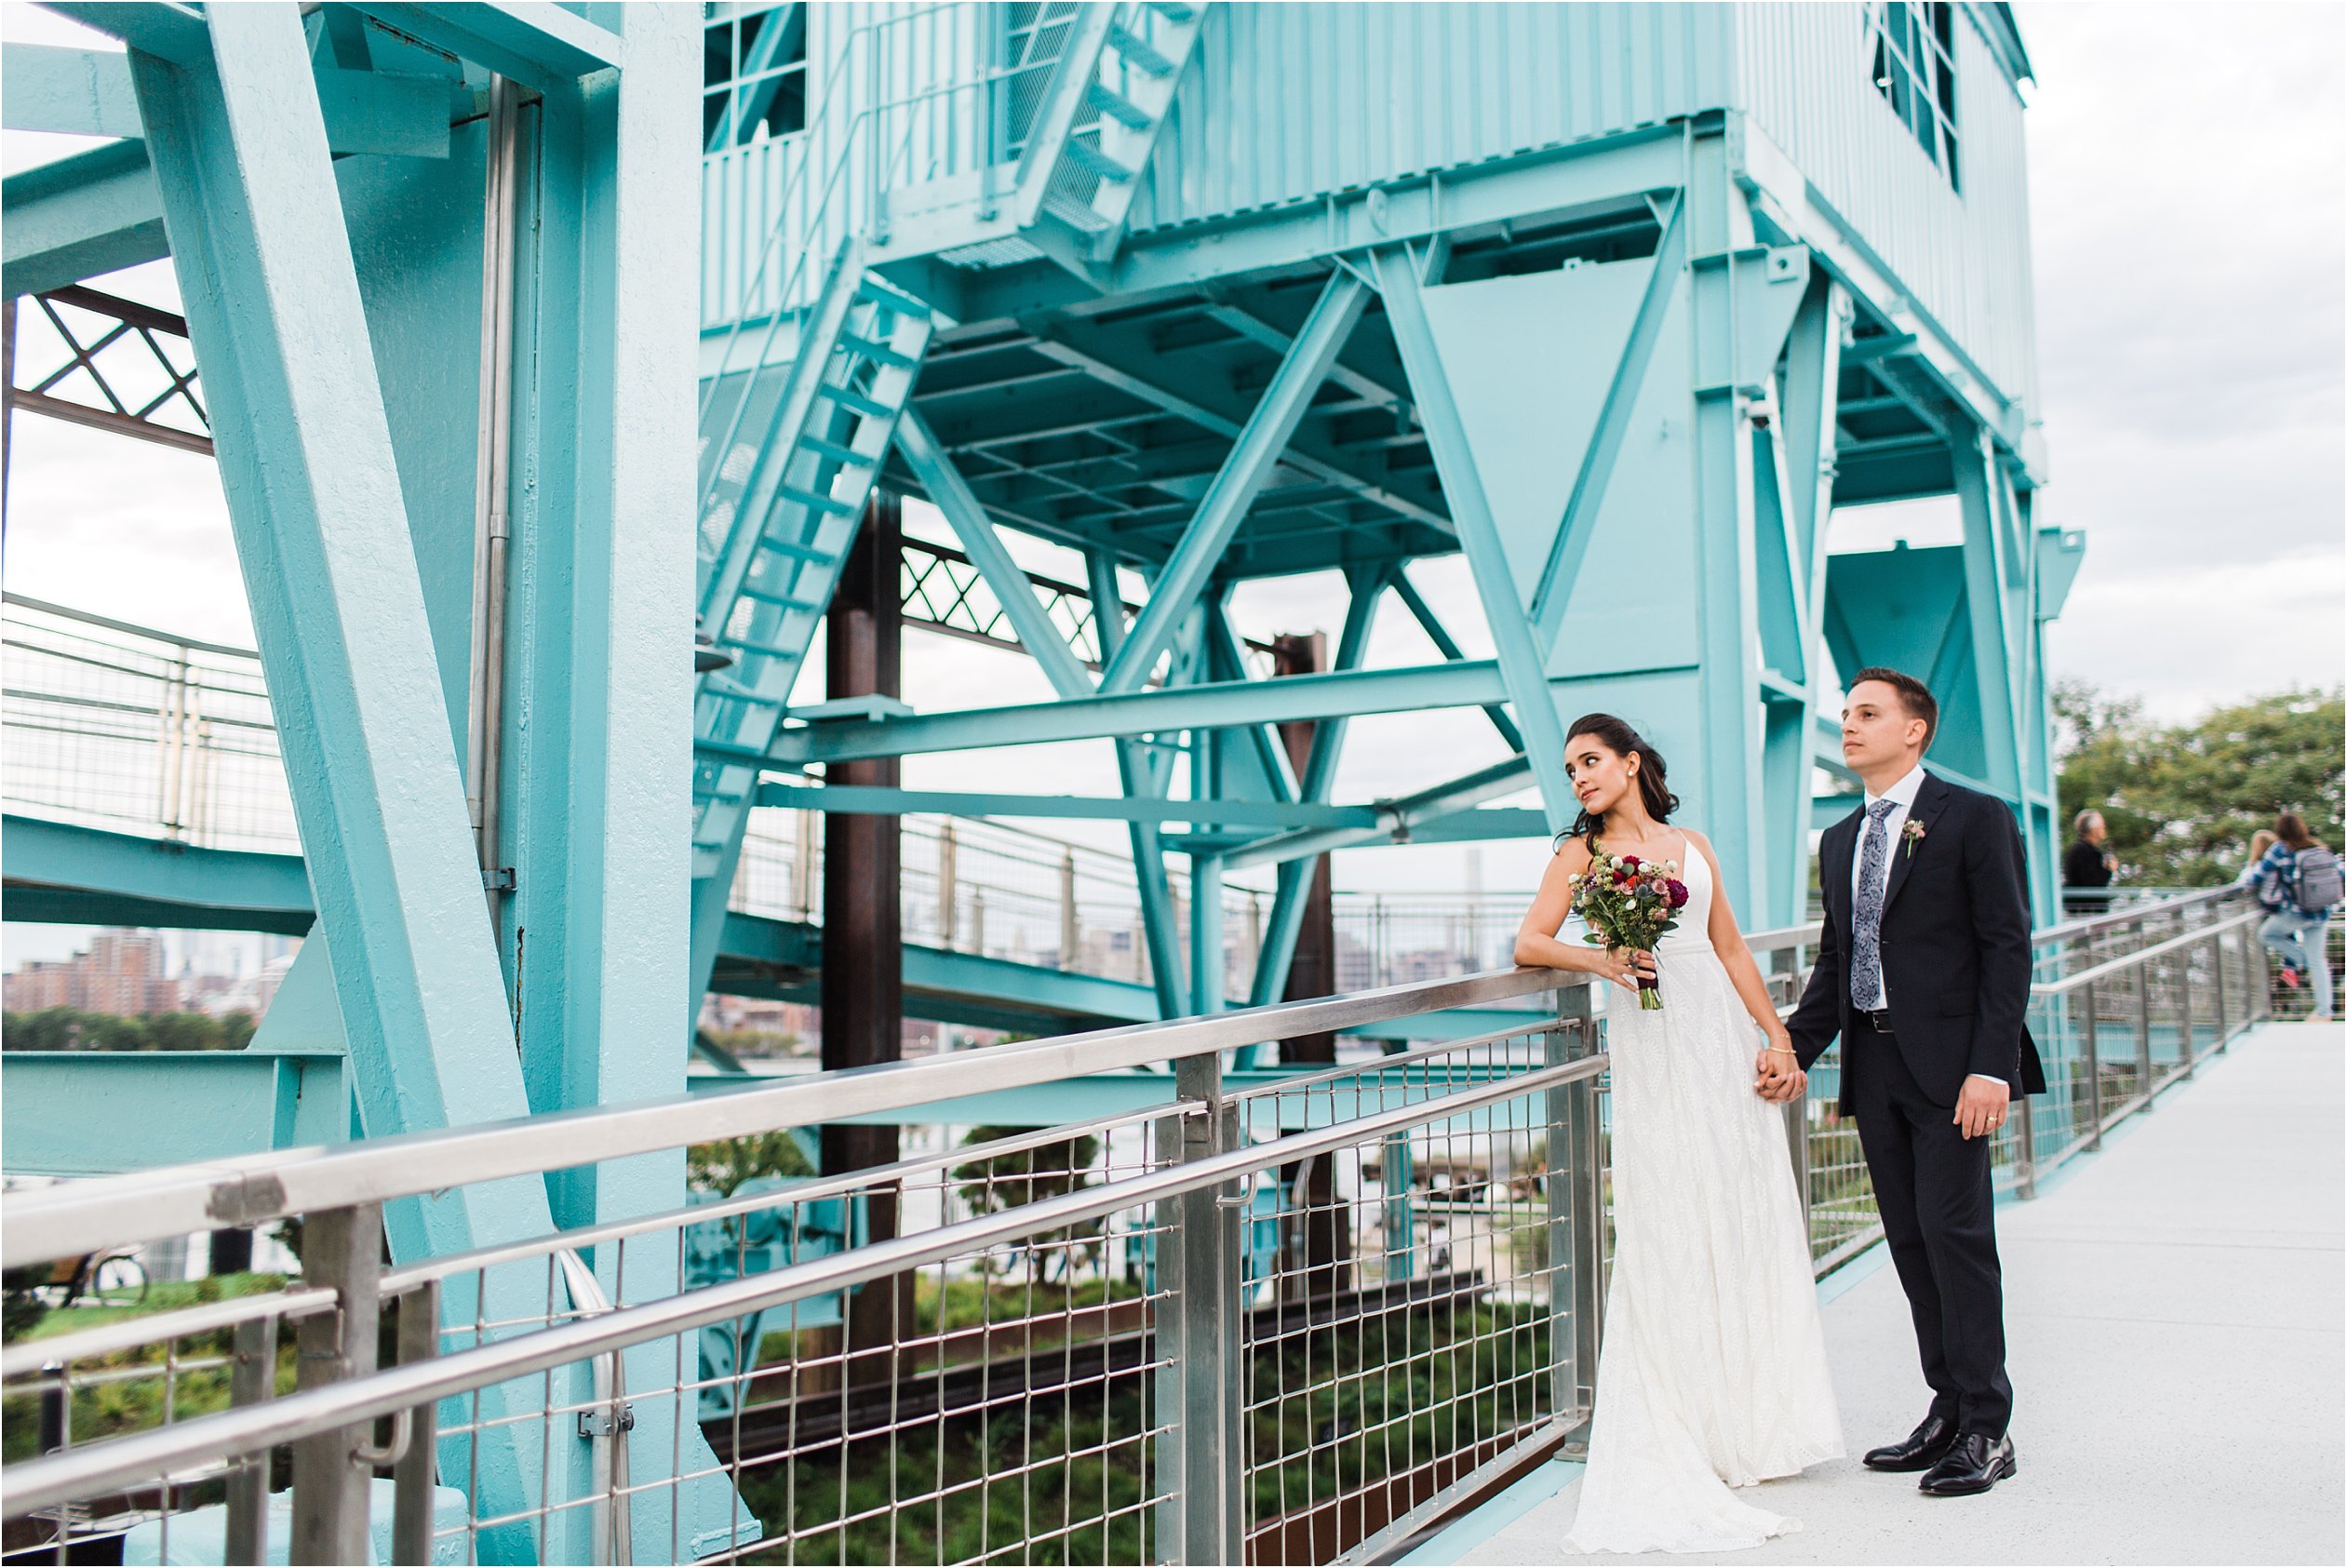 Bride and groom portrait at Domino Park